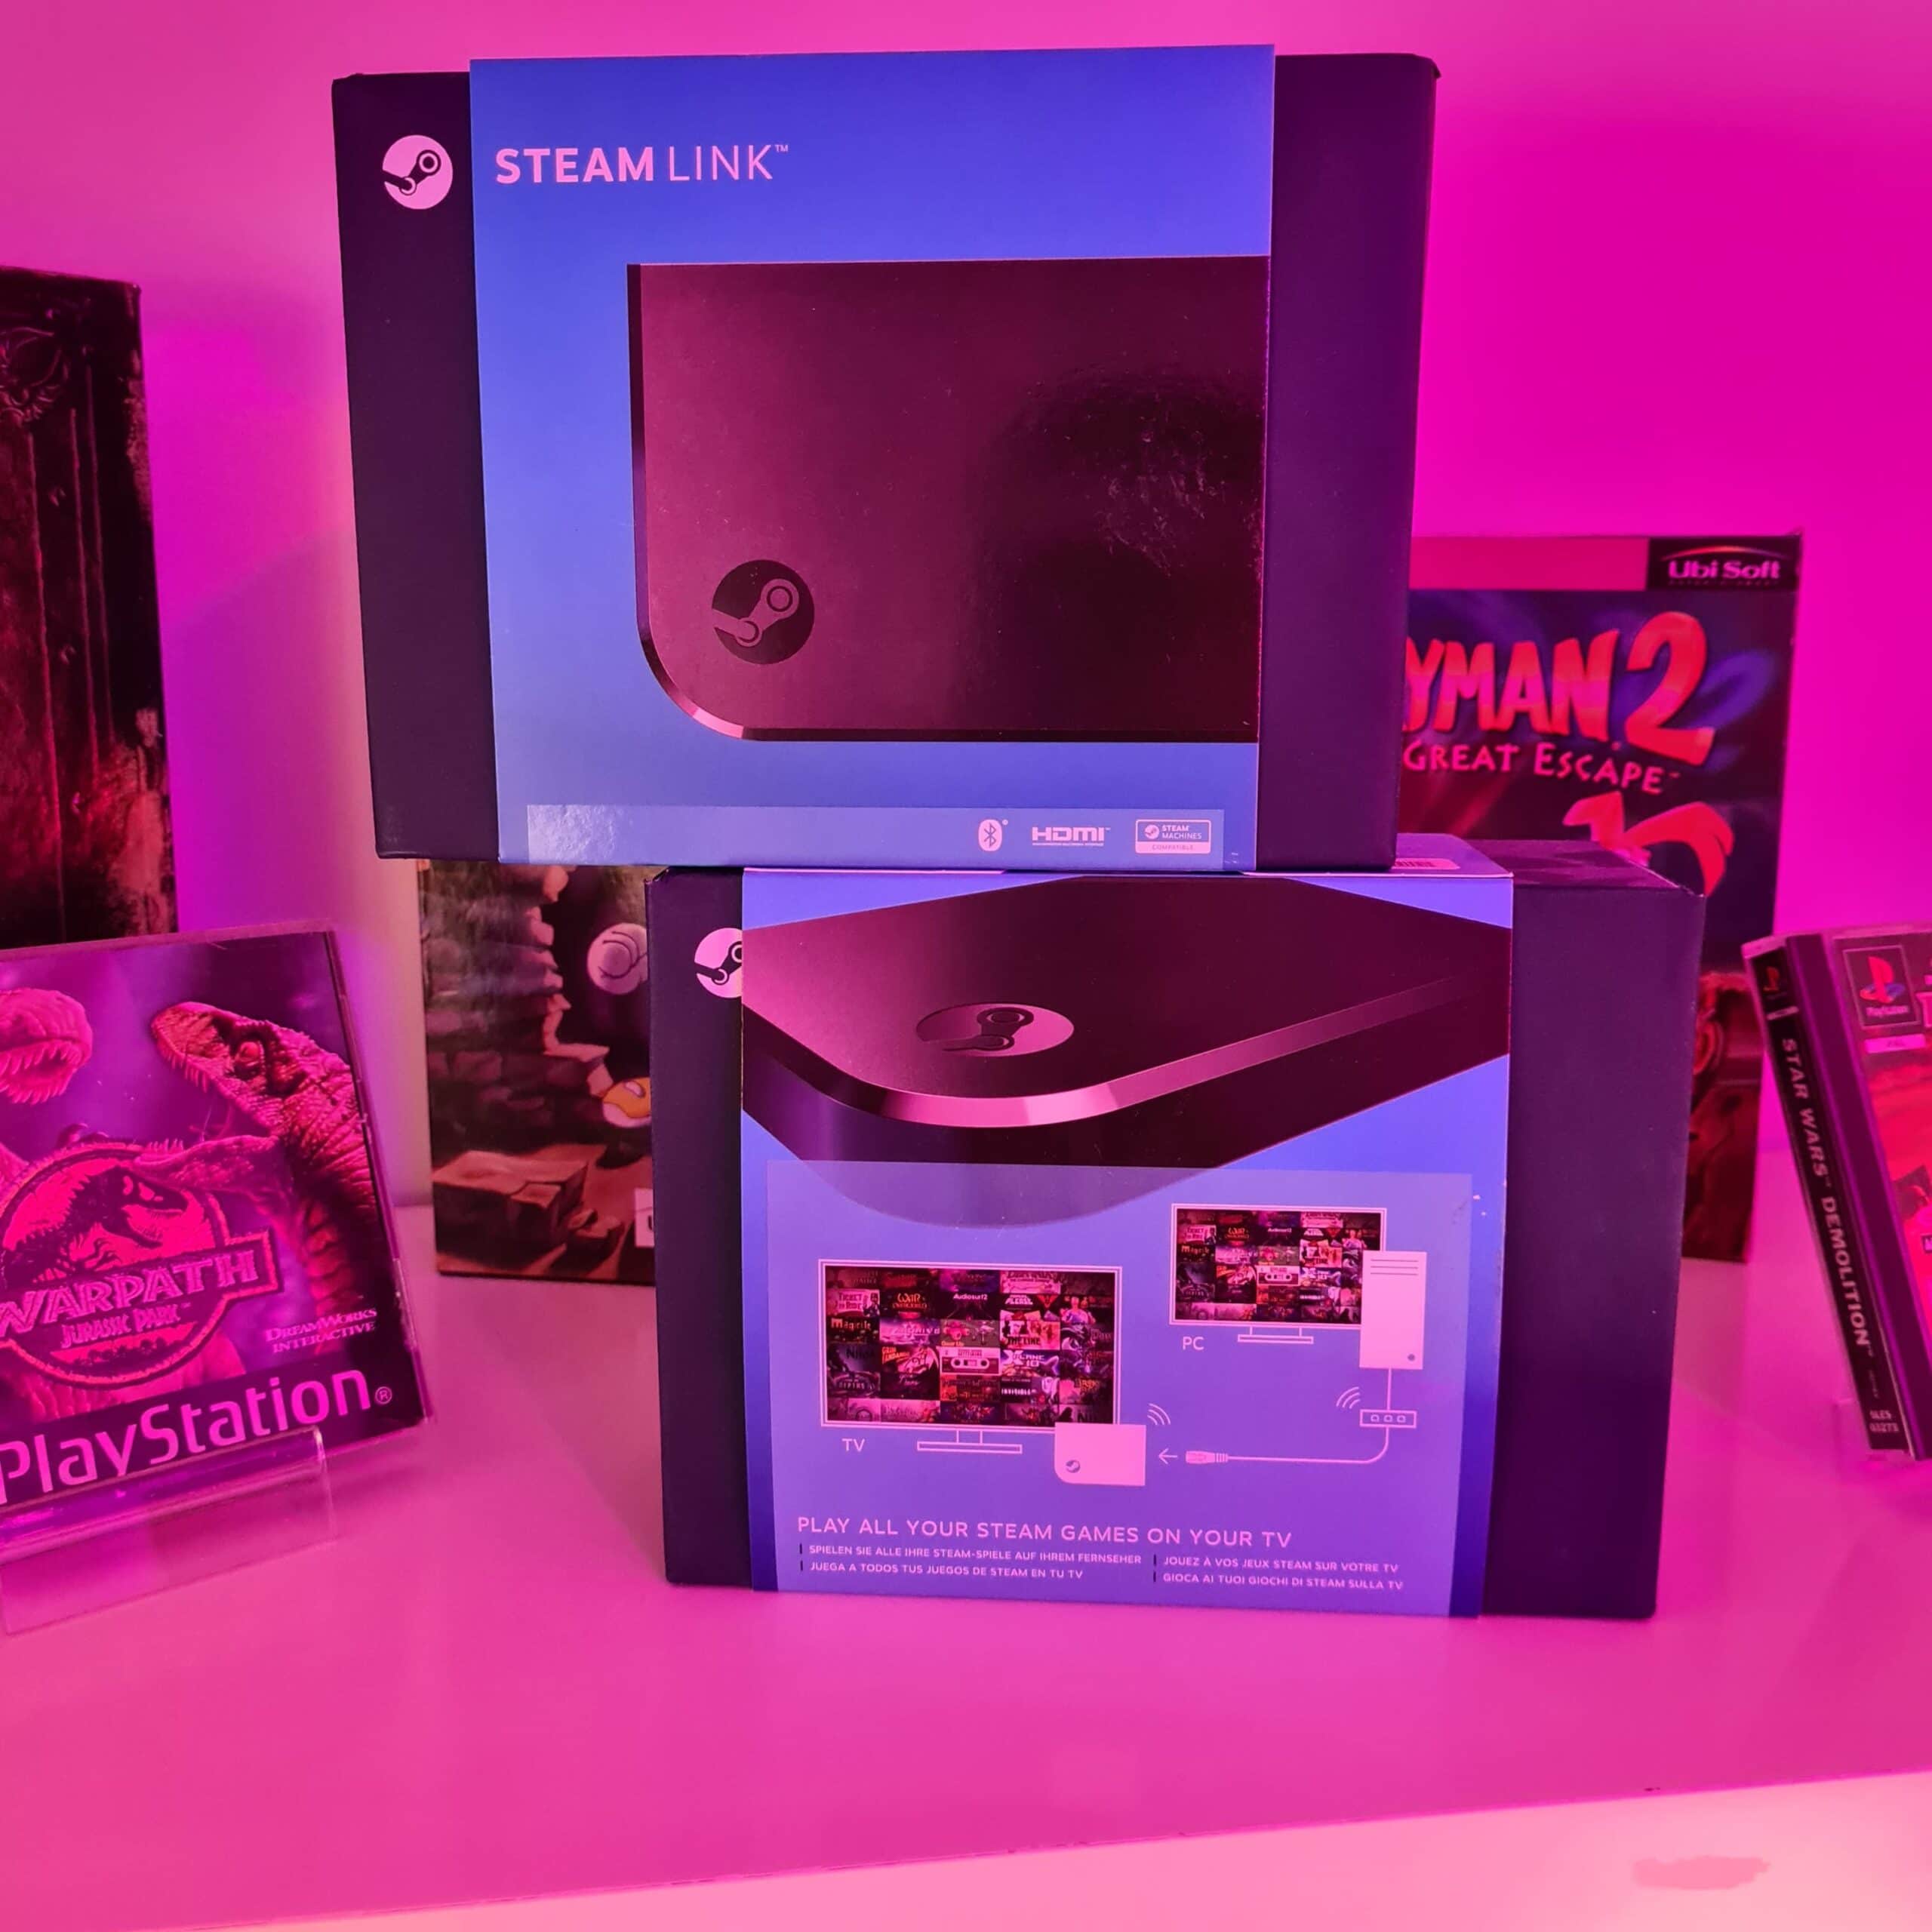 Steam link produckt pacages on table